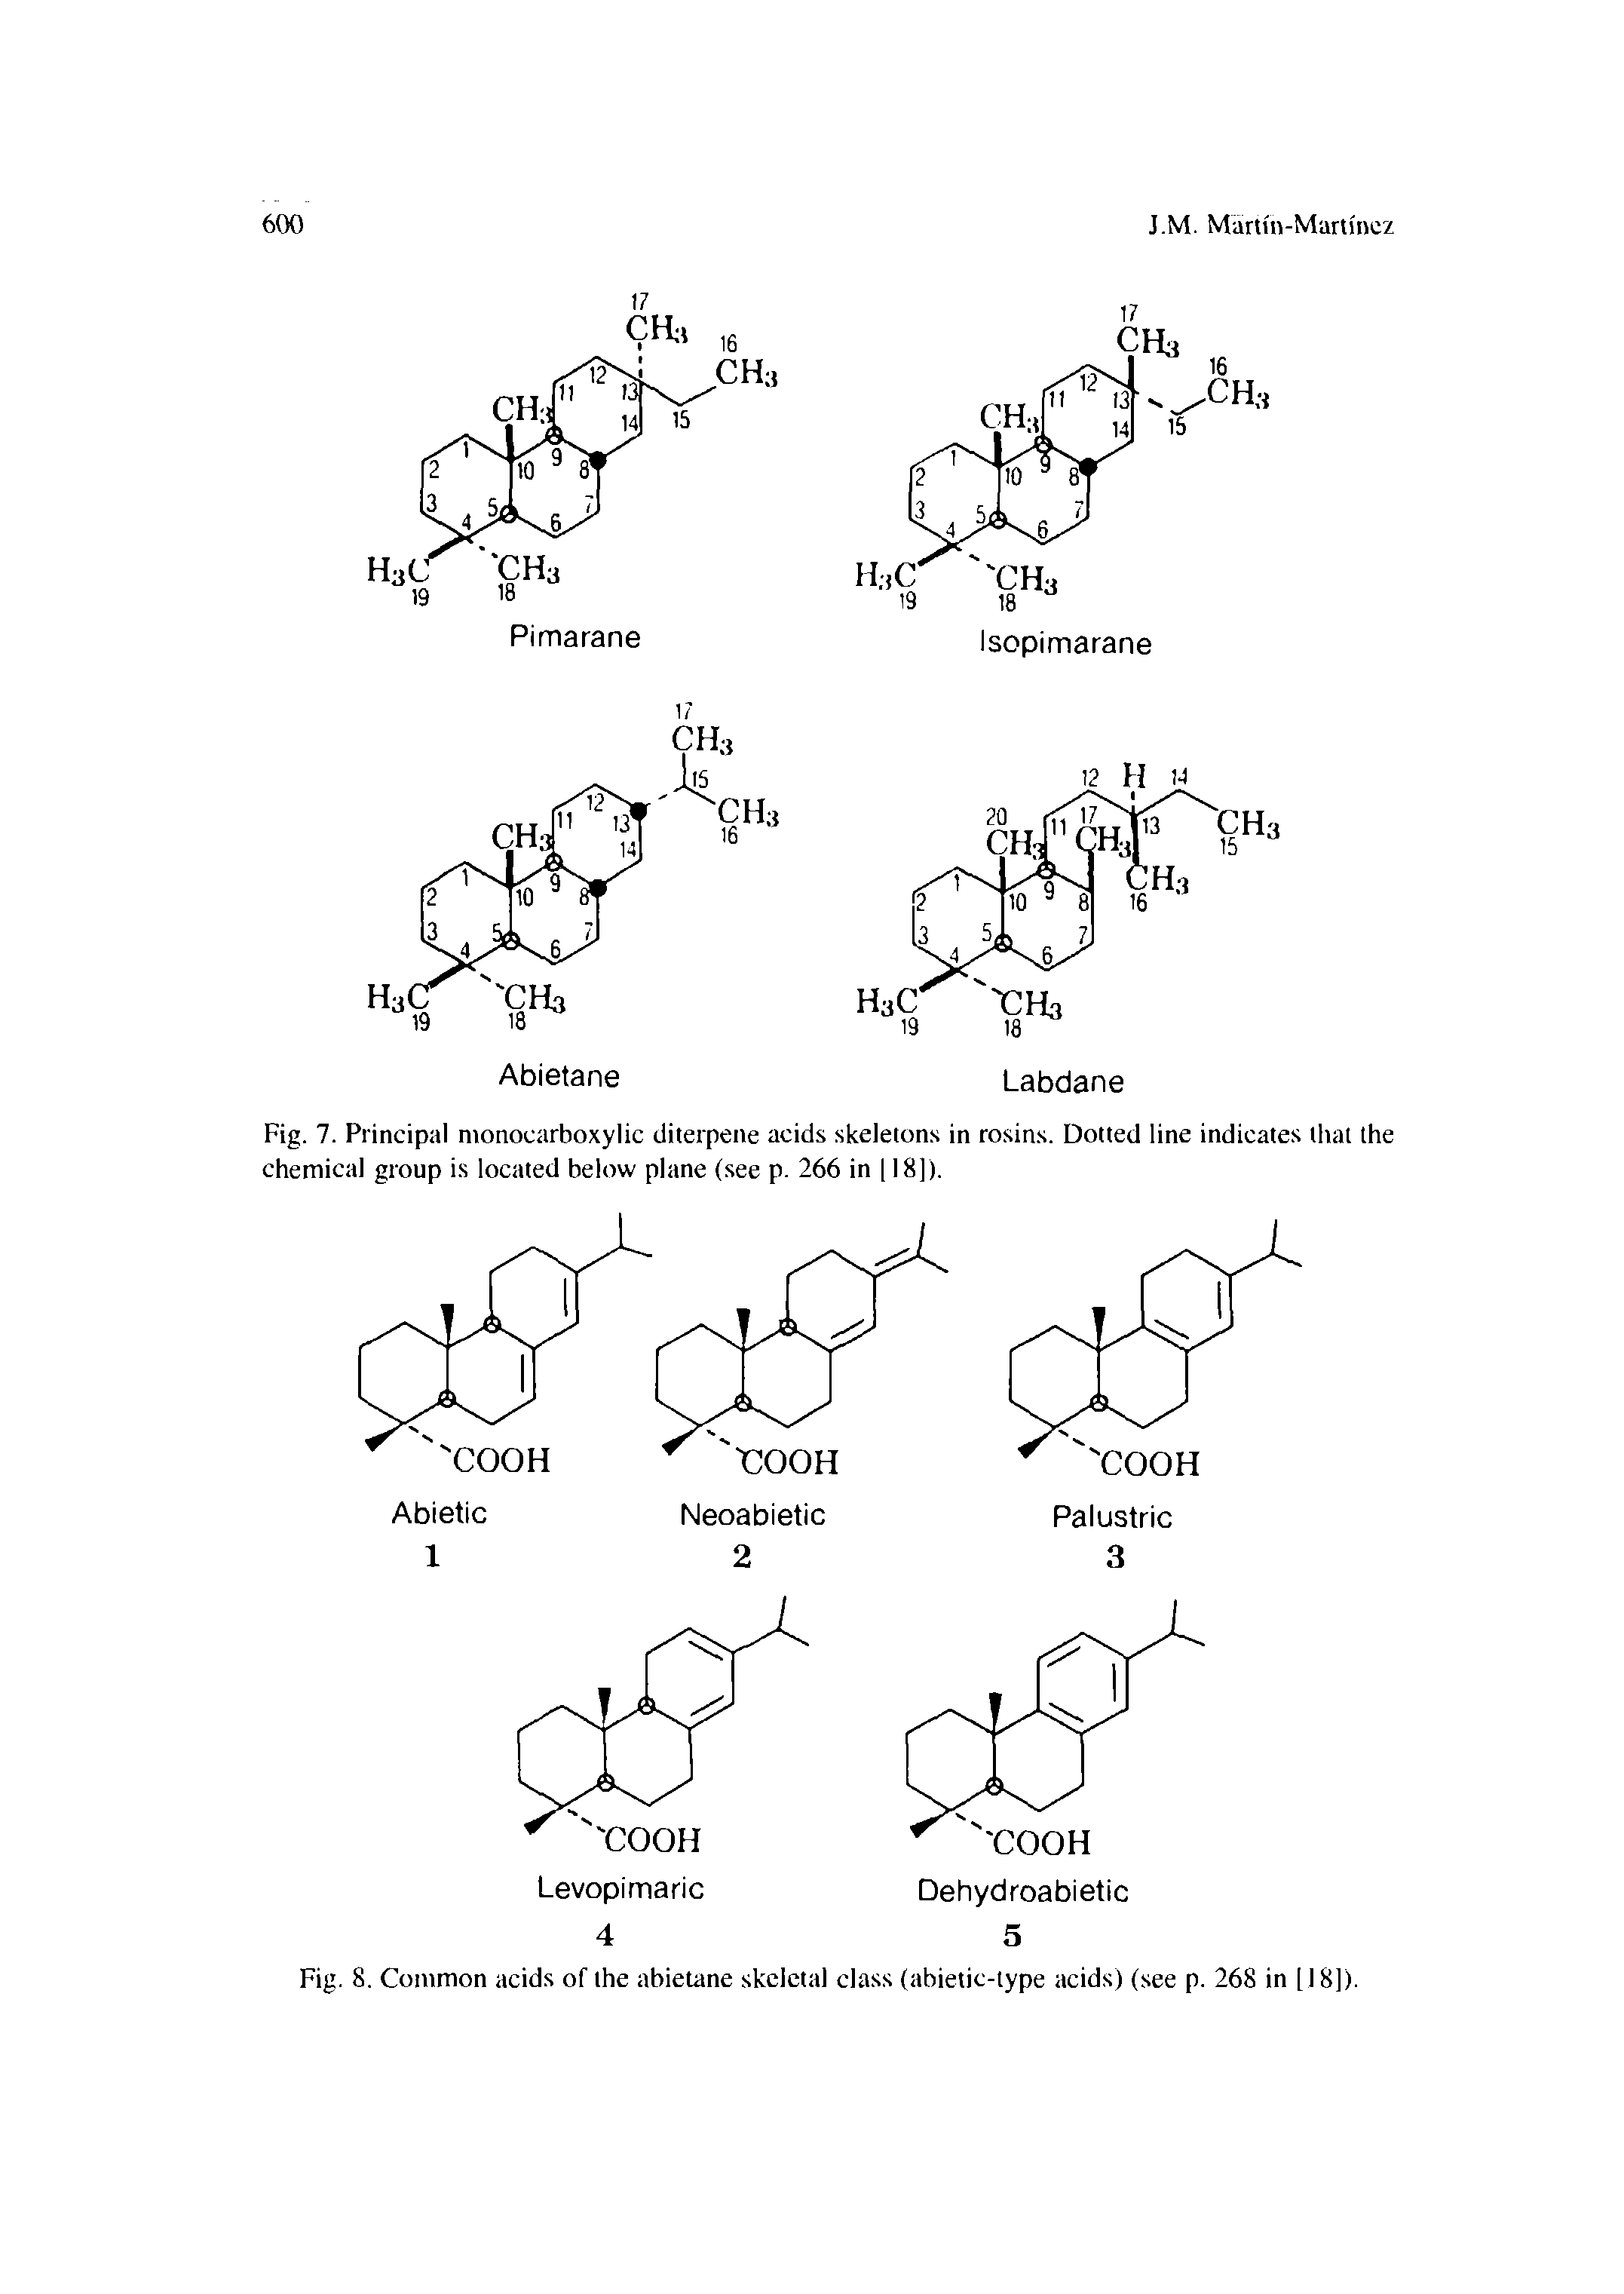 Fig. 7. Principal nionocarboxylic diterpene acids skeletons in rosins. Dotted line indicates that the chemical group is located below plane (see p. 266 in 118]).